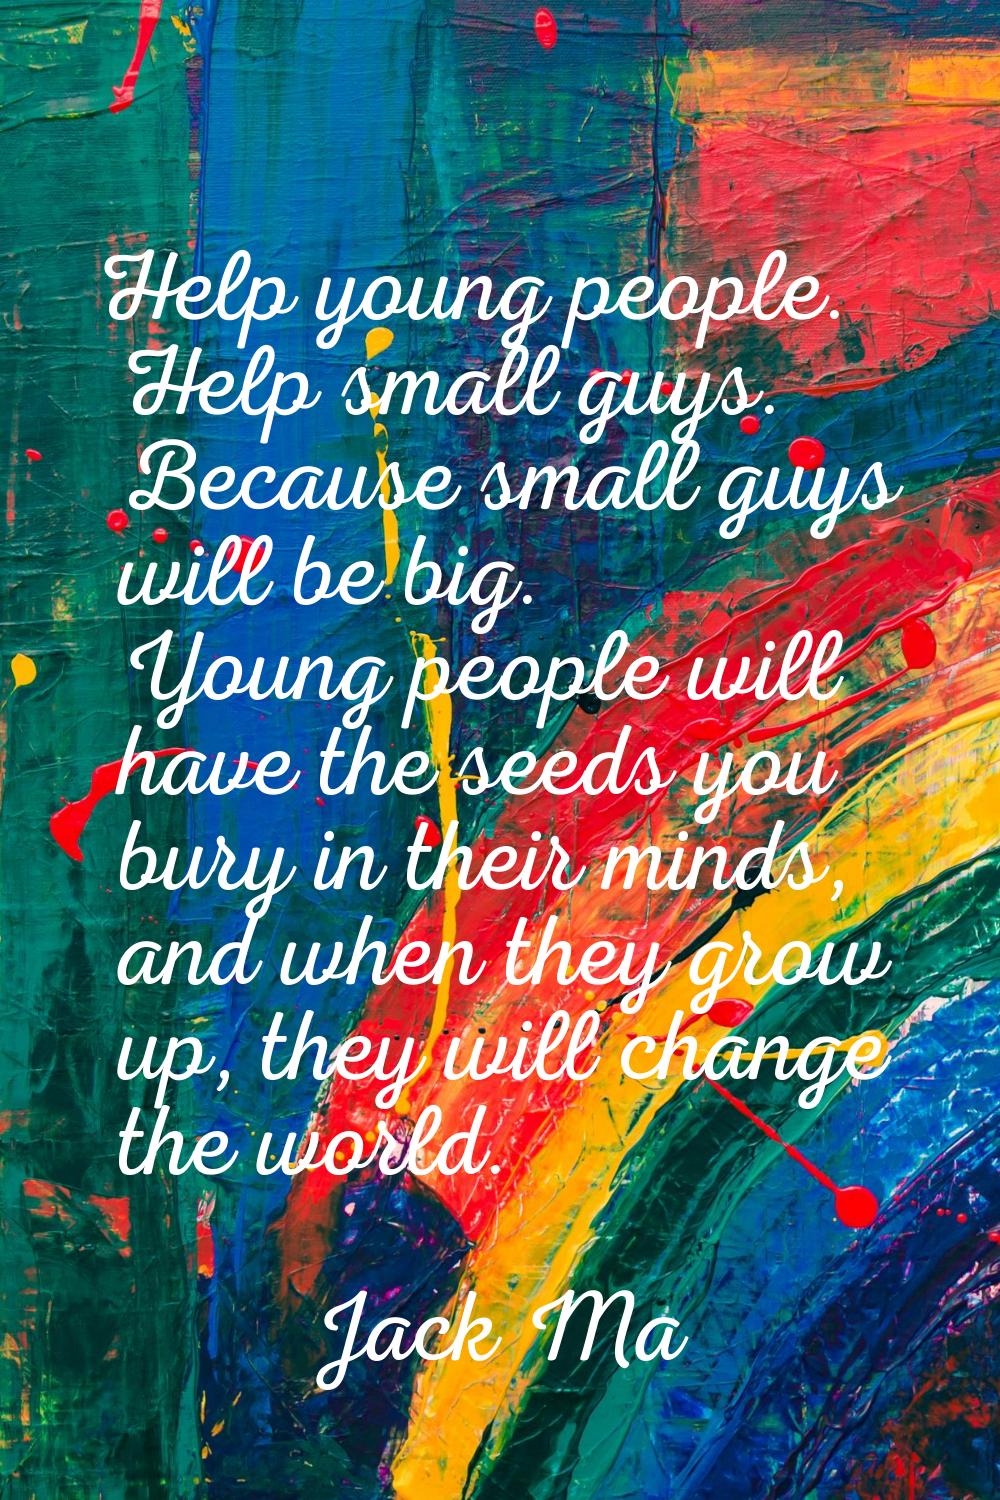 Help young people. Help small guys. Because small guys will be big. Young people will have the seed